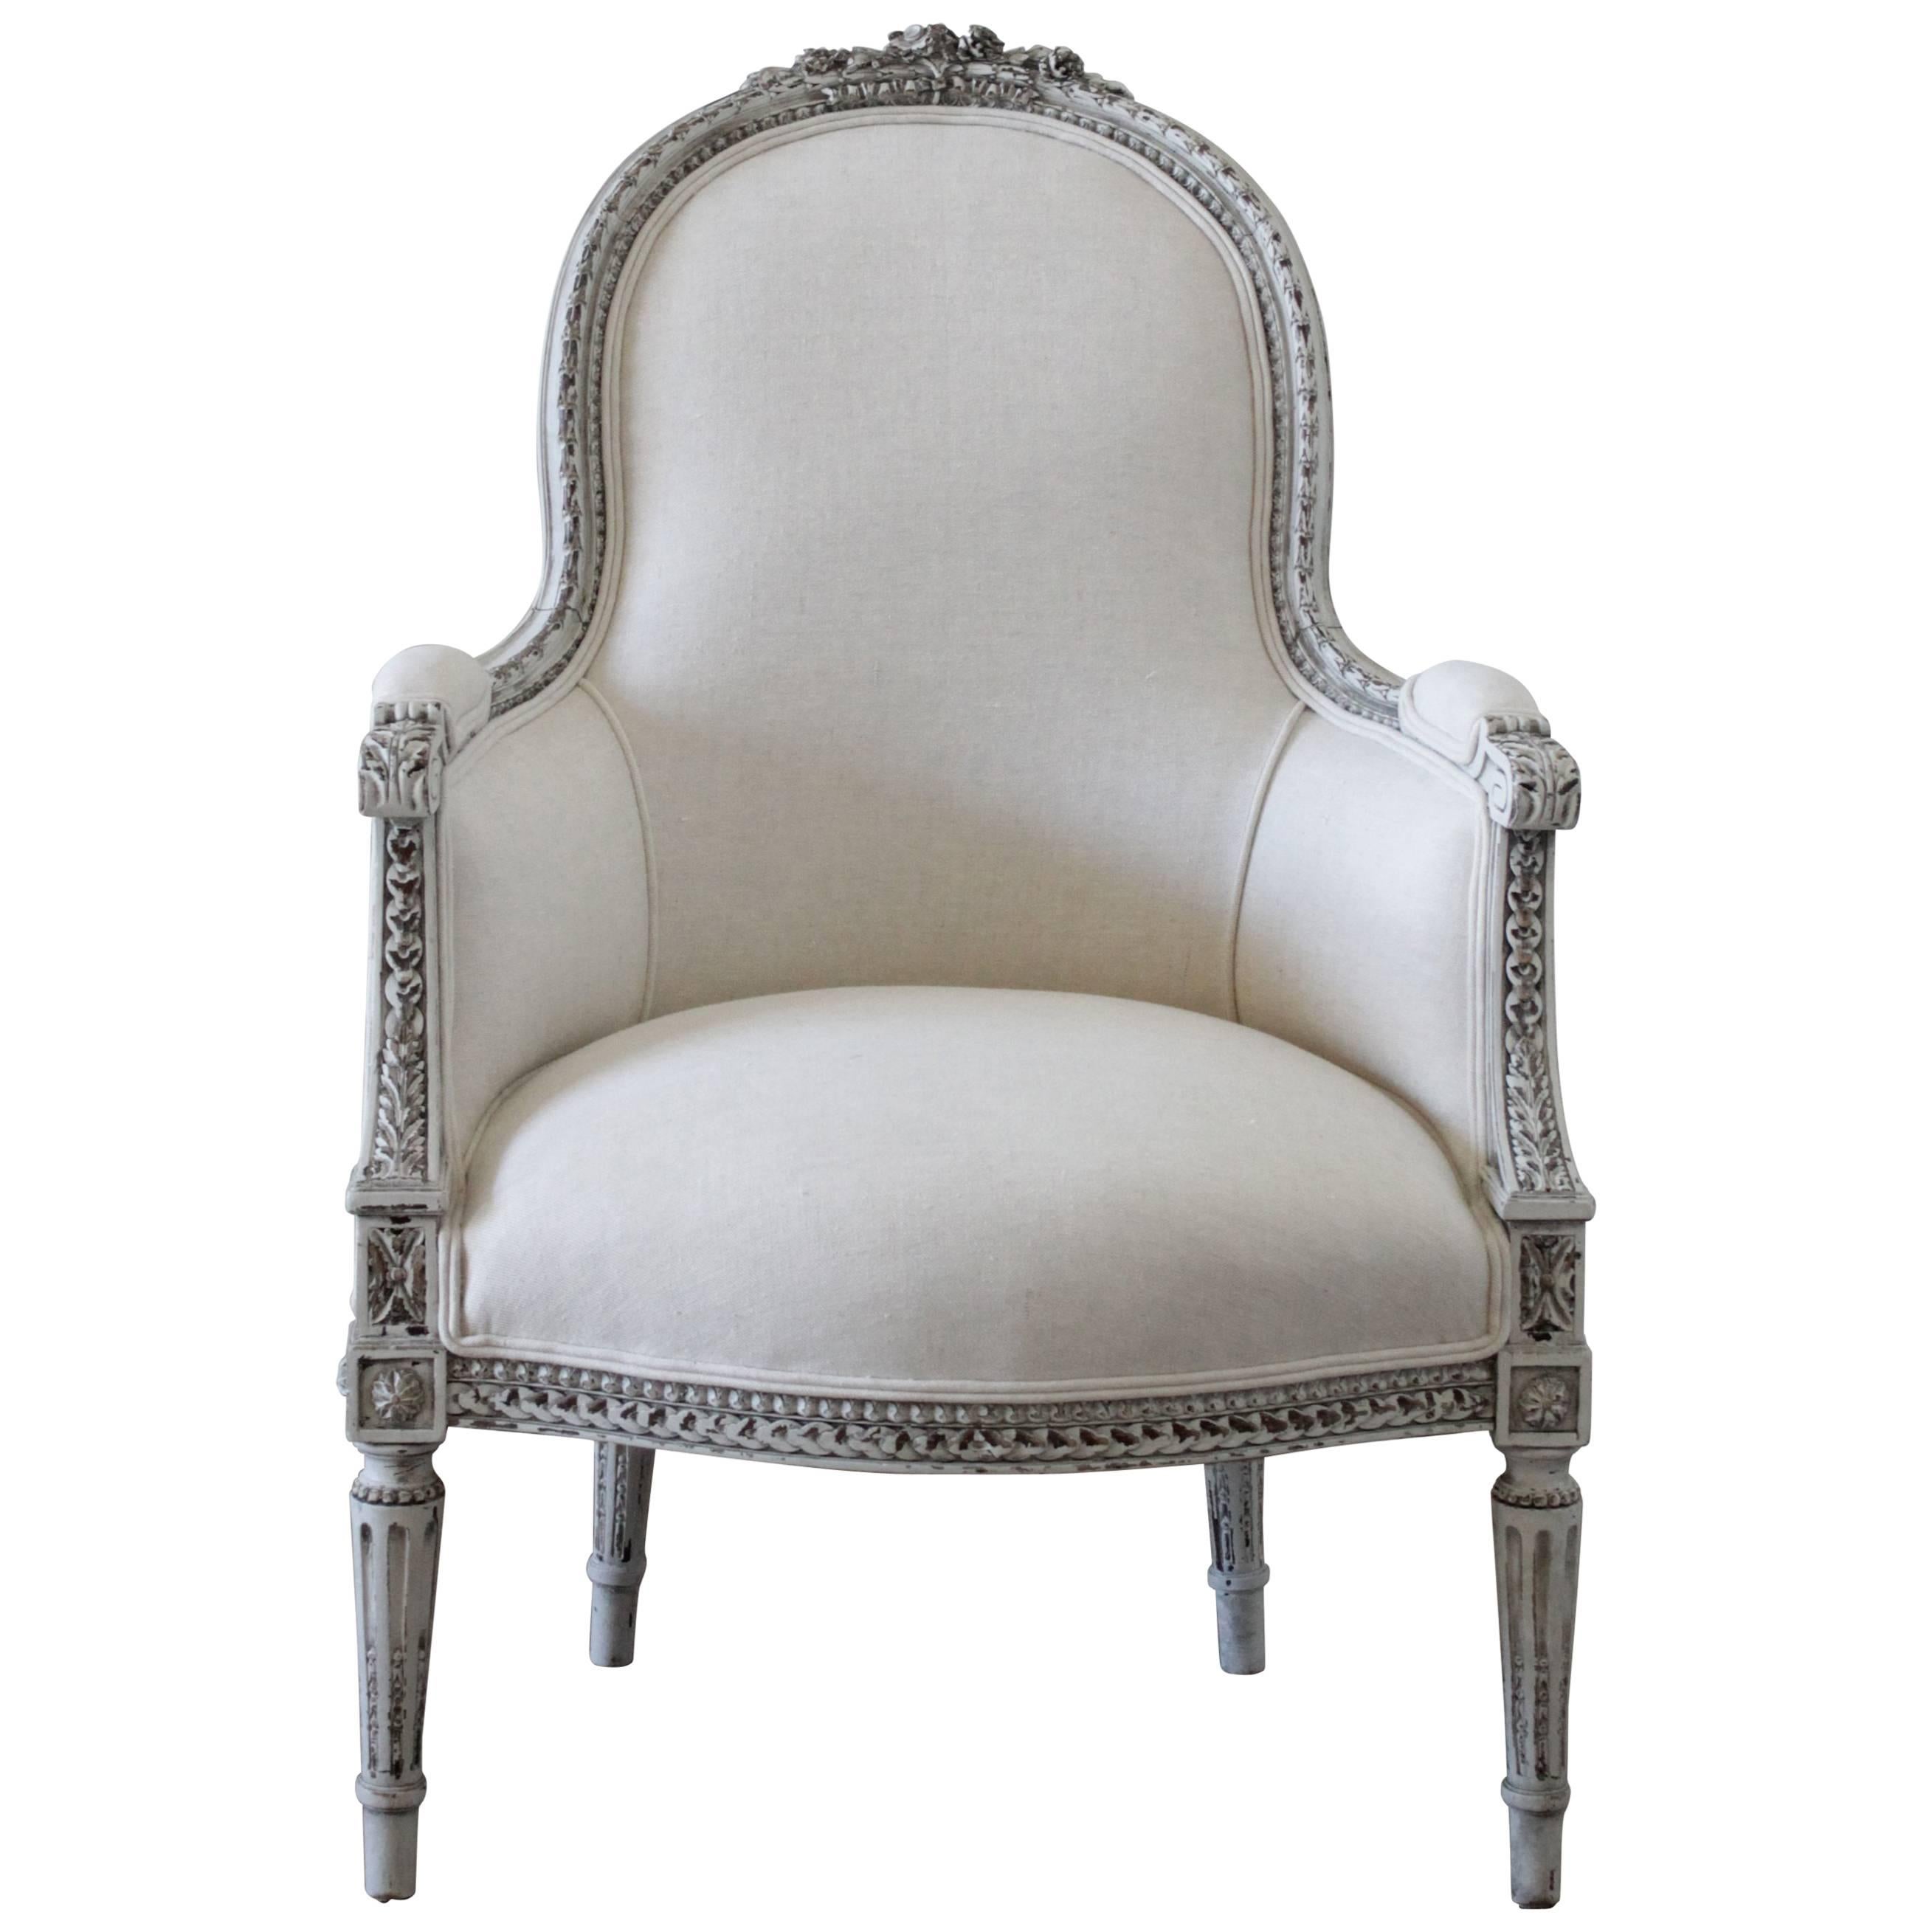 19th Century Painted and Carved French Louis XVI Bergere Chair in Organic Linen